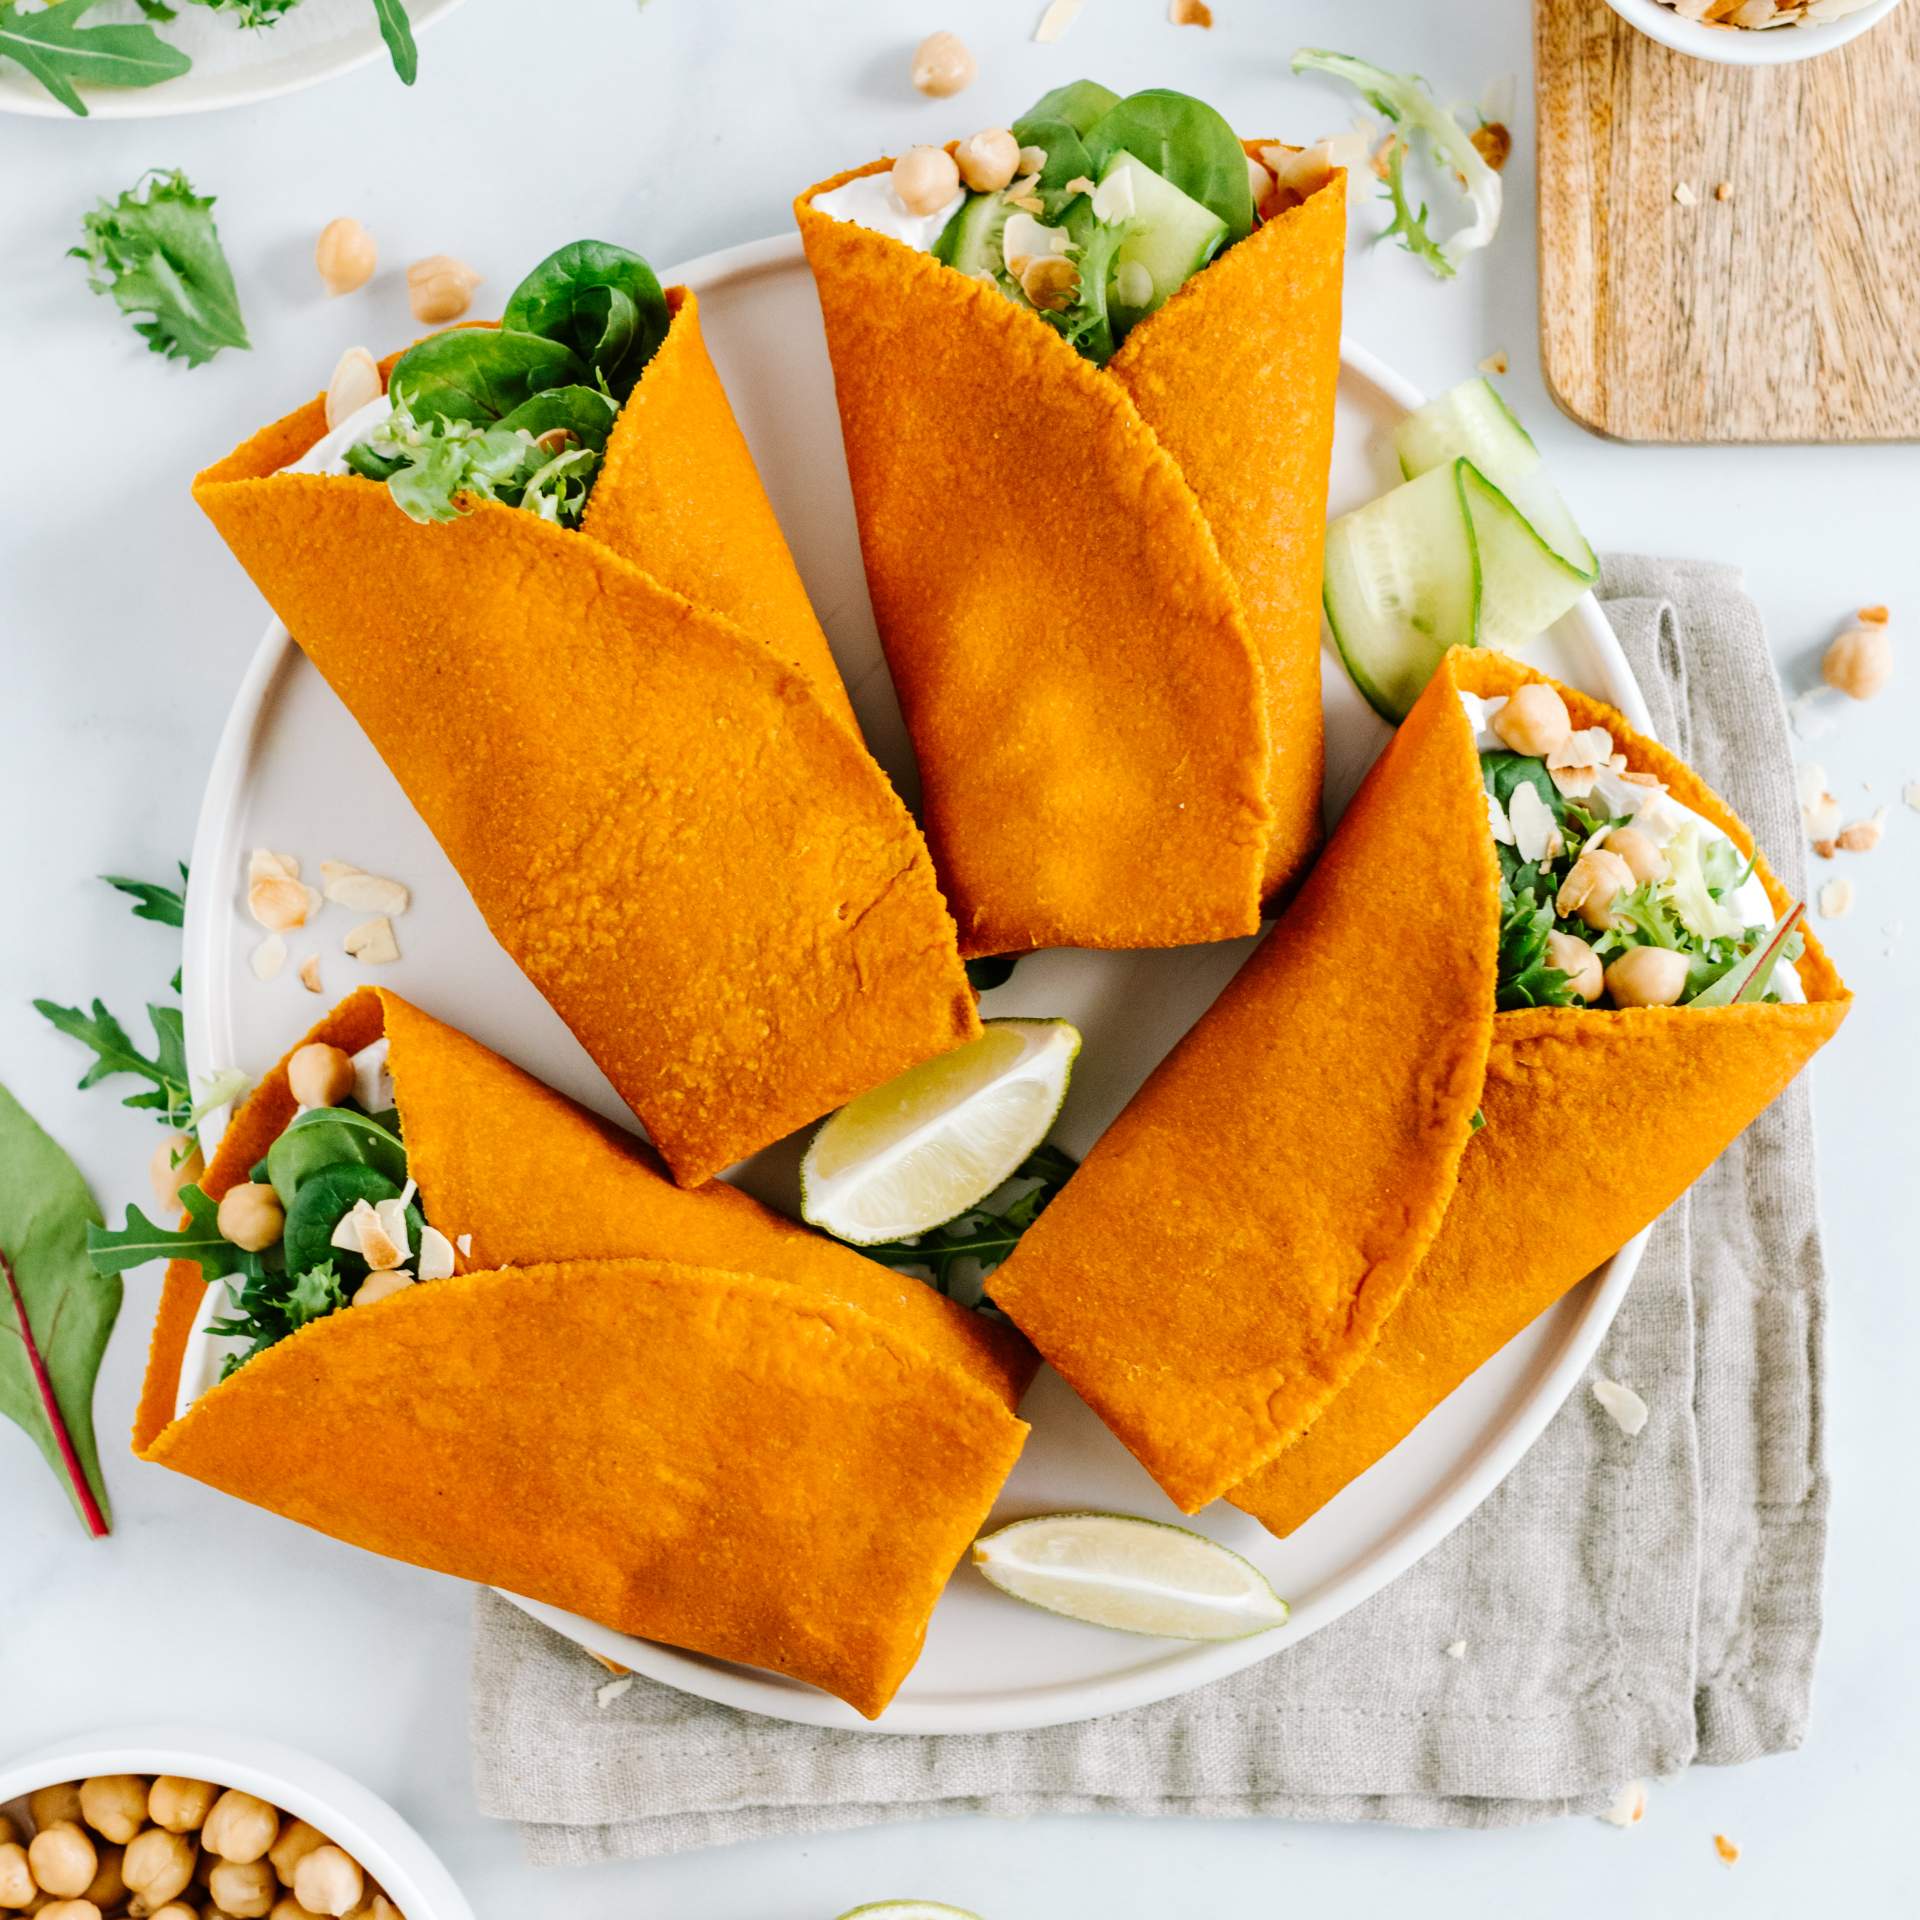 Whole Vegetable Carrot Wraps with Spread and Chickpeas